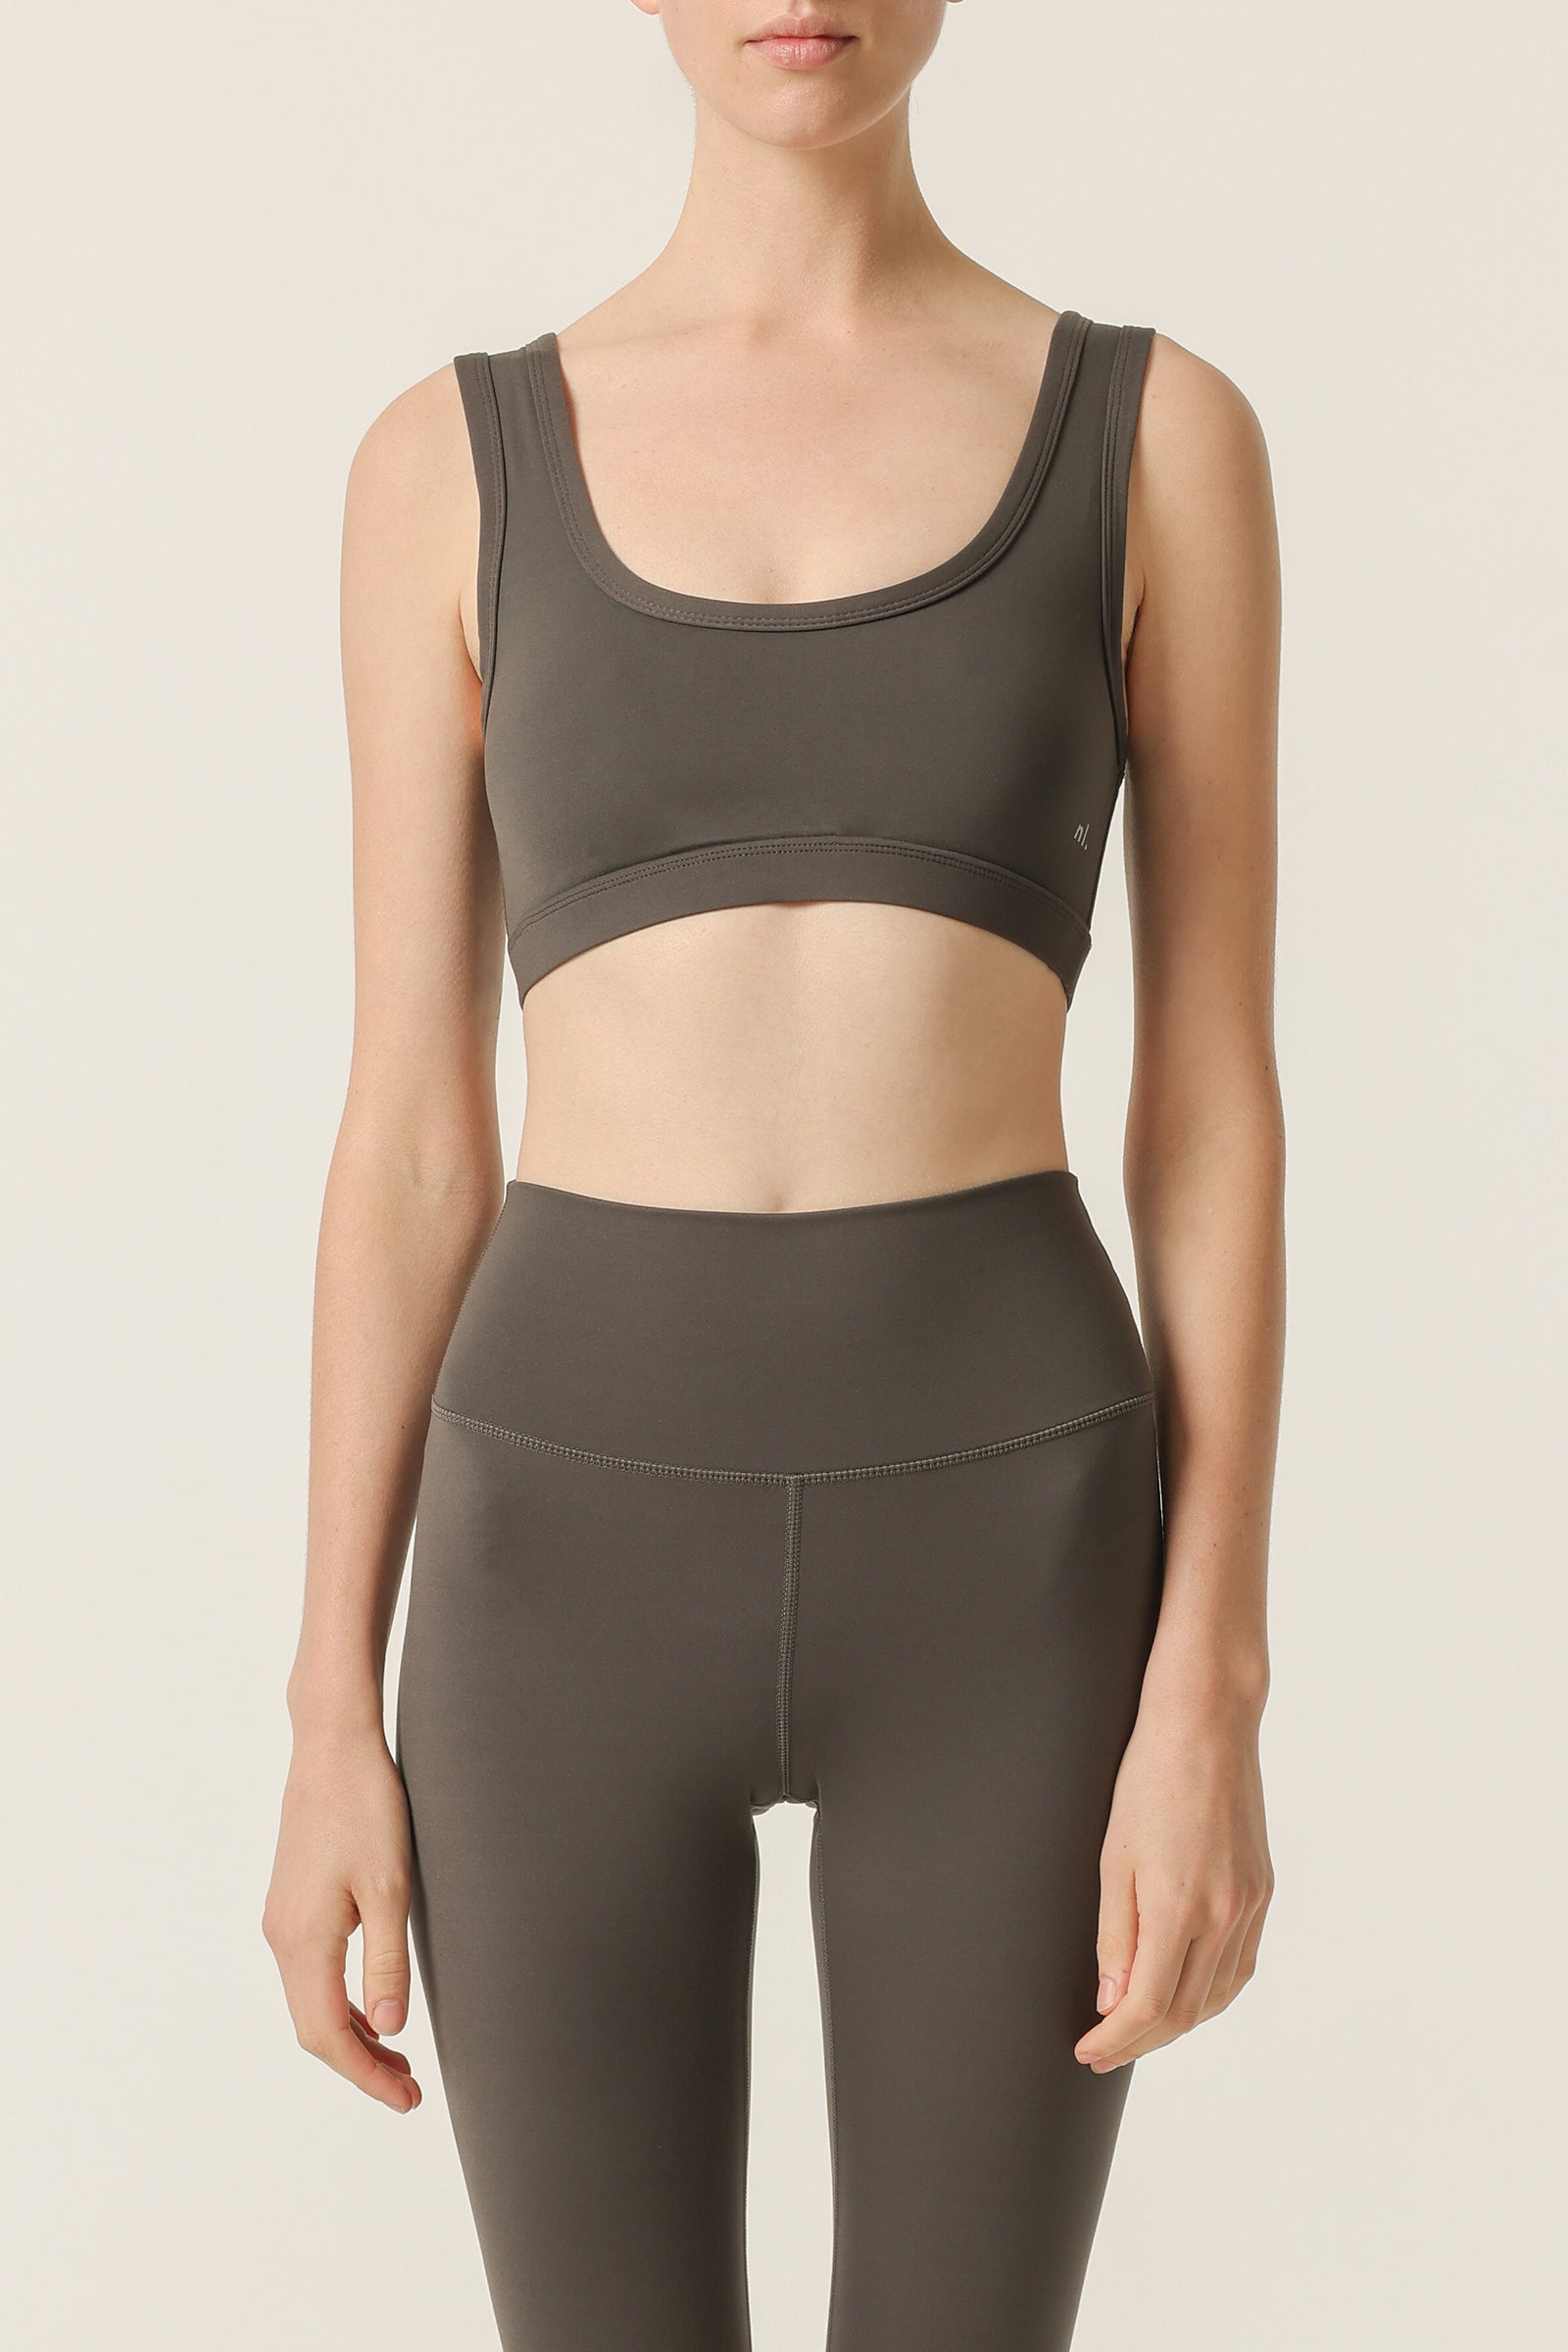 Nude Lucy Nude Active Crop Top In A Dark Grey In A Brown Coal Colour 